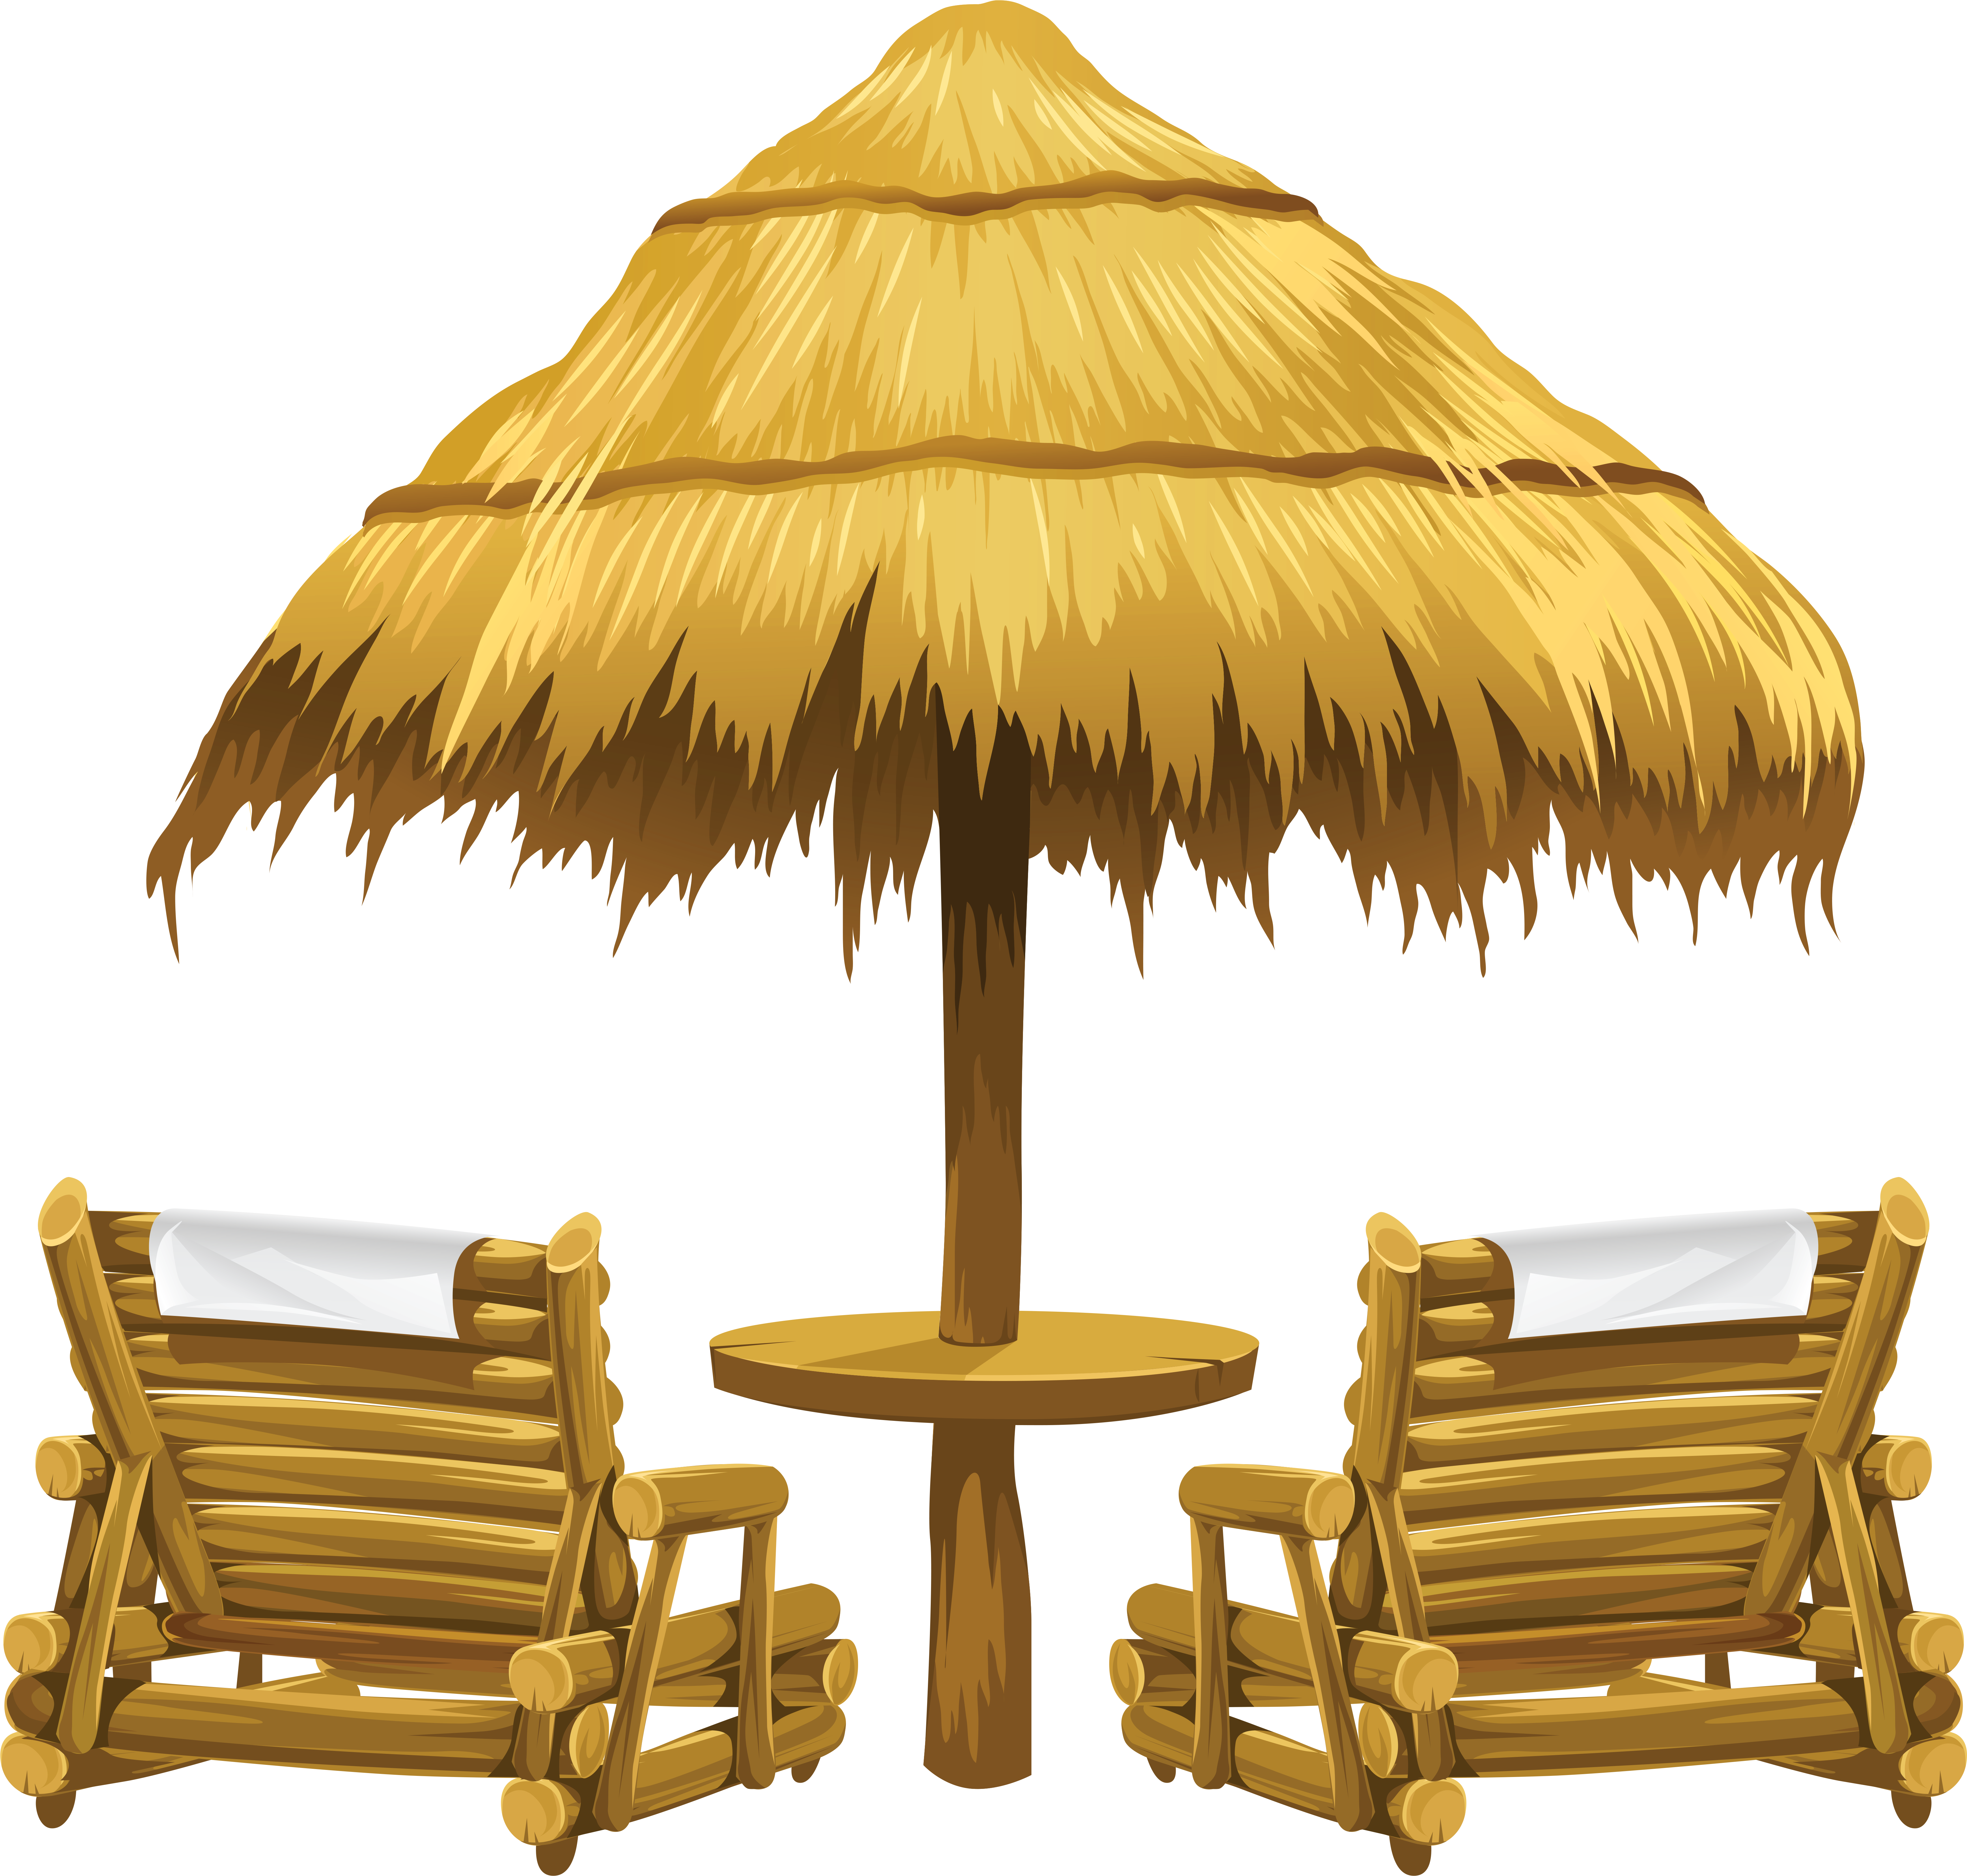 Transparent Tiki Beach Umbrella And Chairs Png Clipart - Transparent Tiki Beach Umbrella And Chairs Png Clipart (7336x6797)